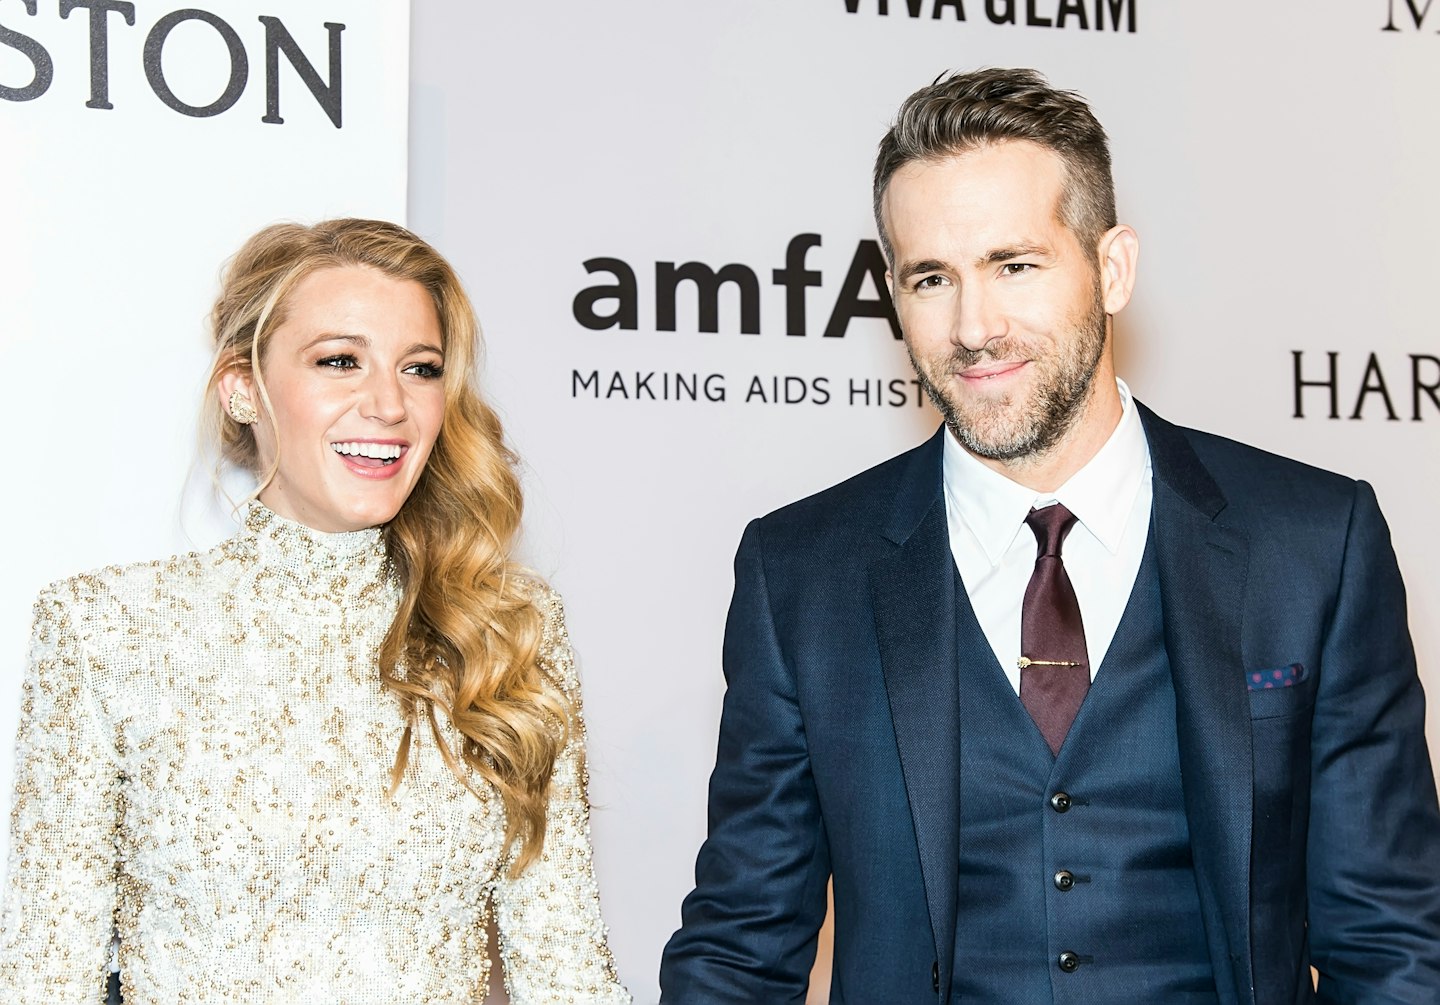 Blake Lively Celebrated Her Birthday Early in a Beautiful Dress